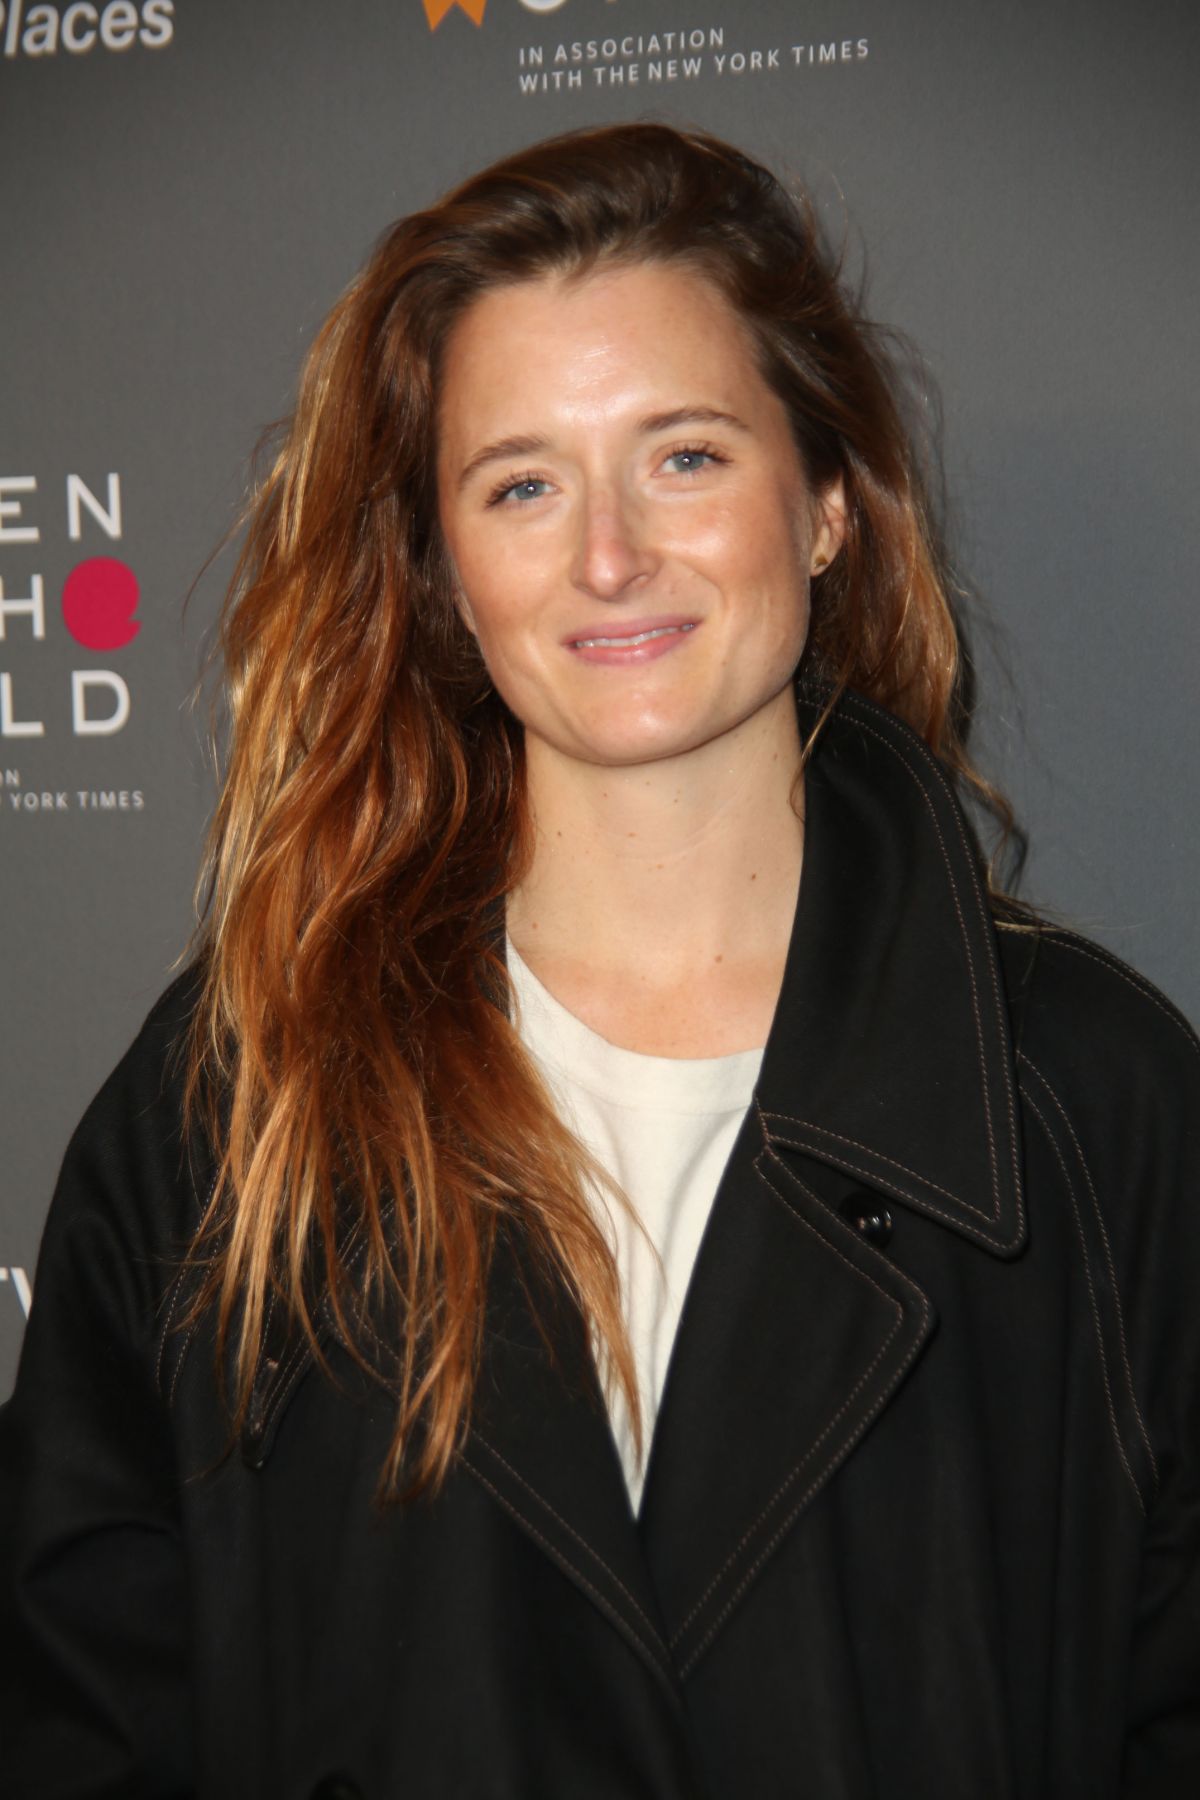 GRACE GUMMER at 8th Annual Women in the World Summit in New York 04/05/2017